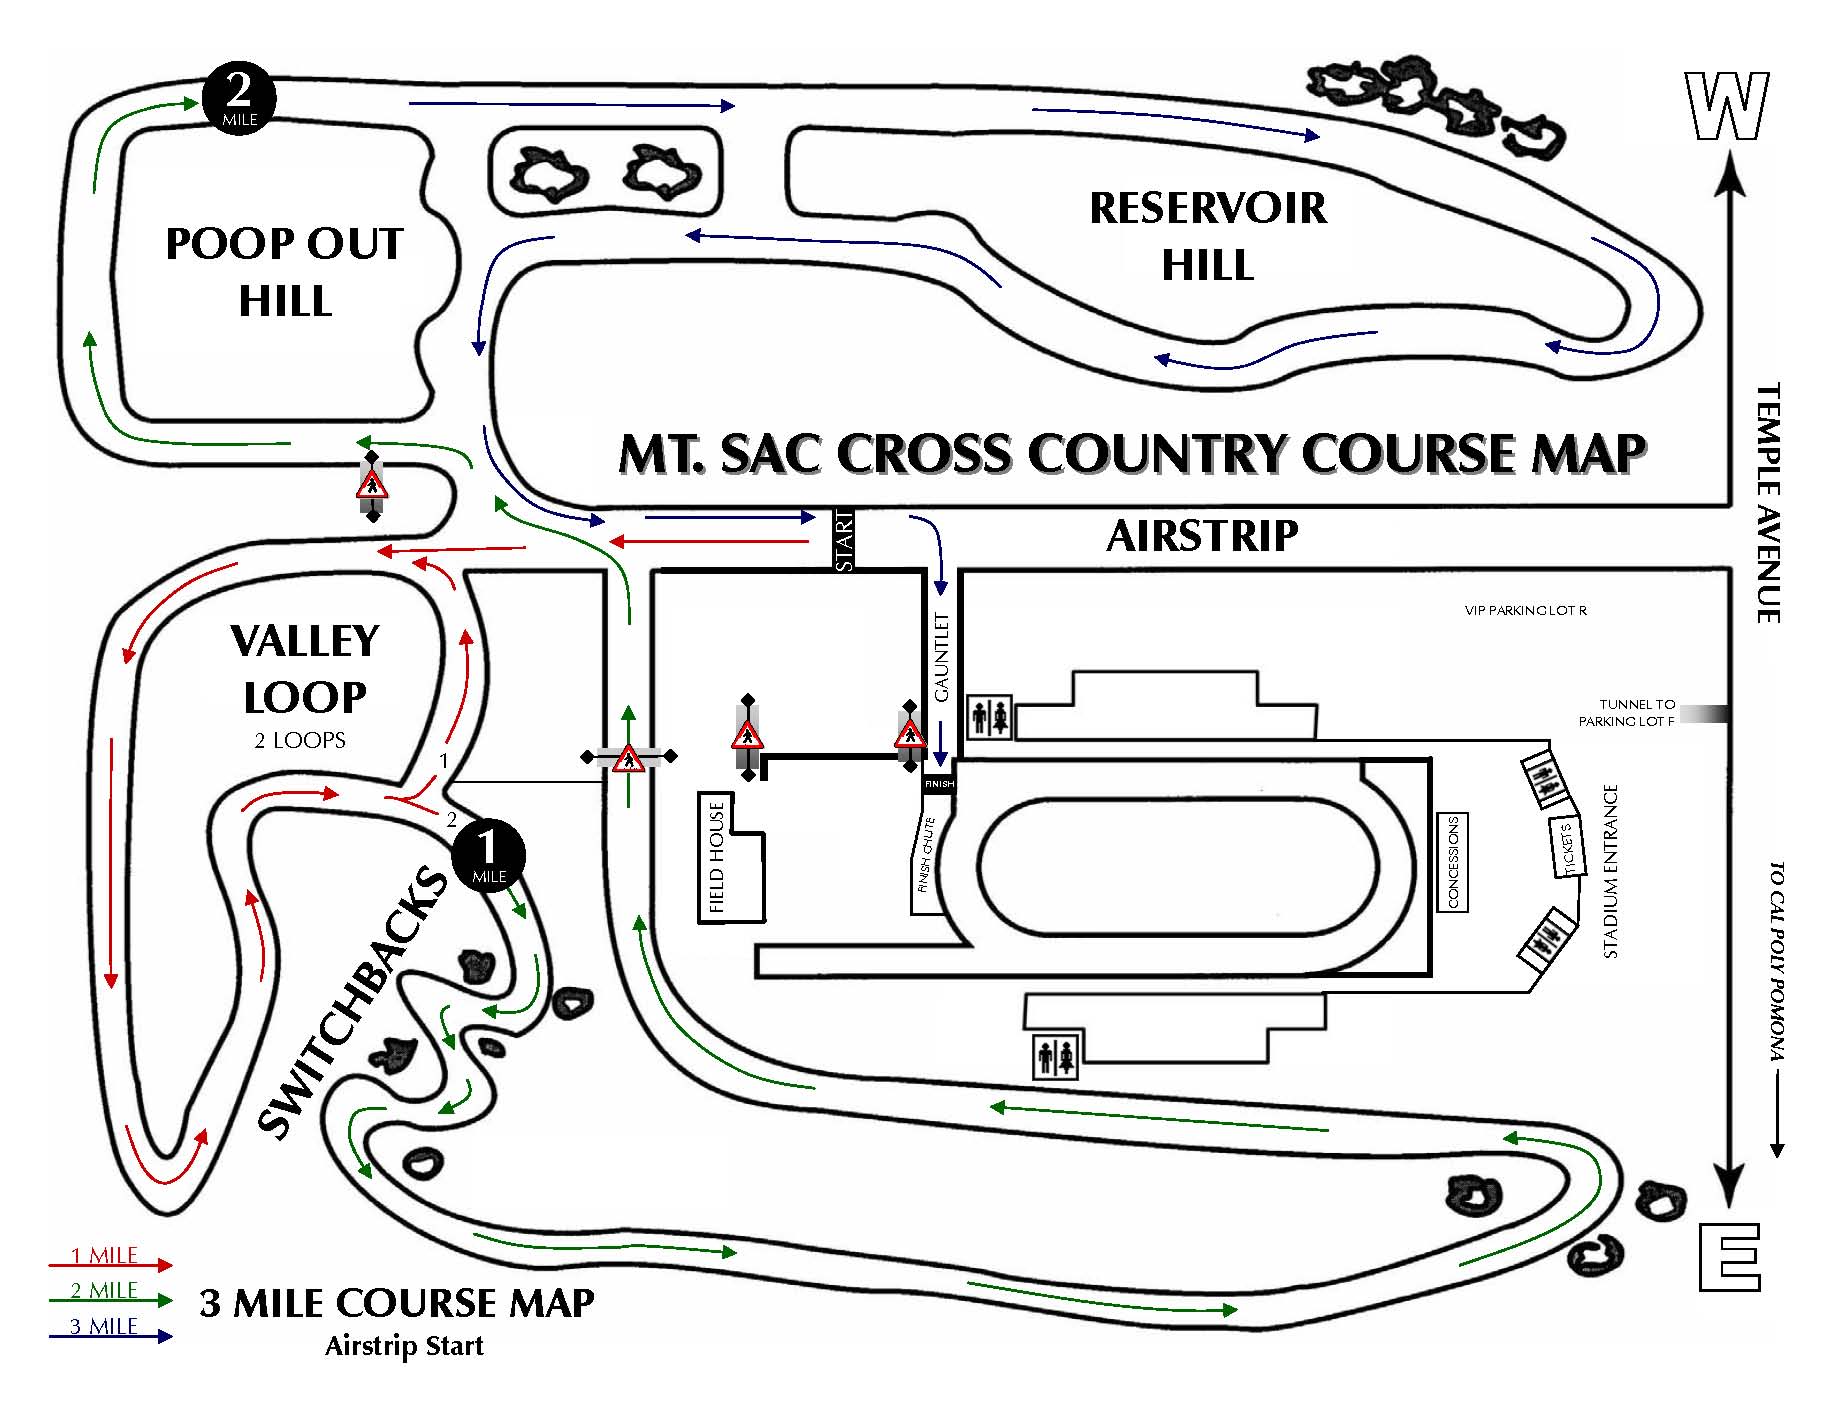 Mt SAC (course map - drawing)